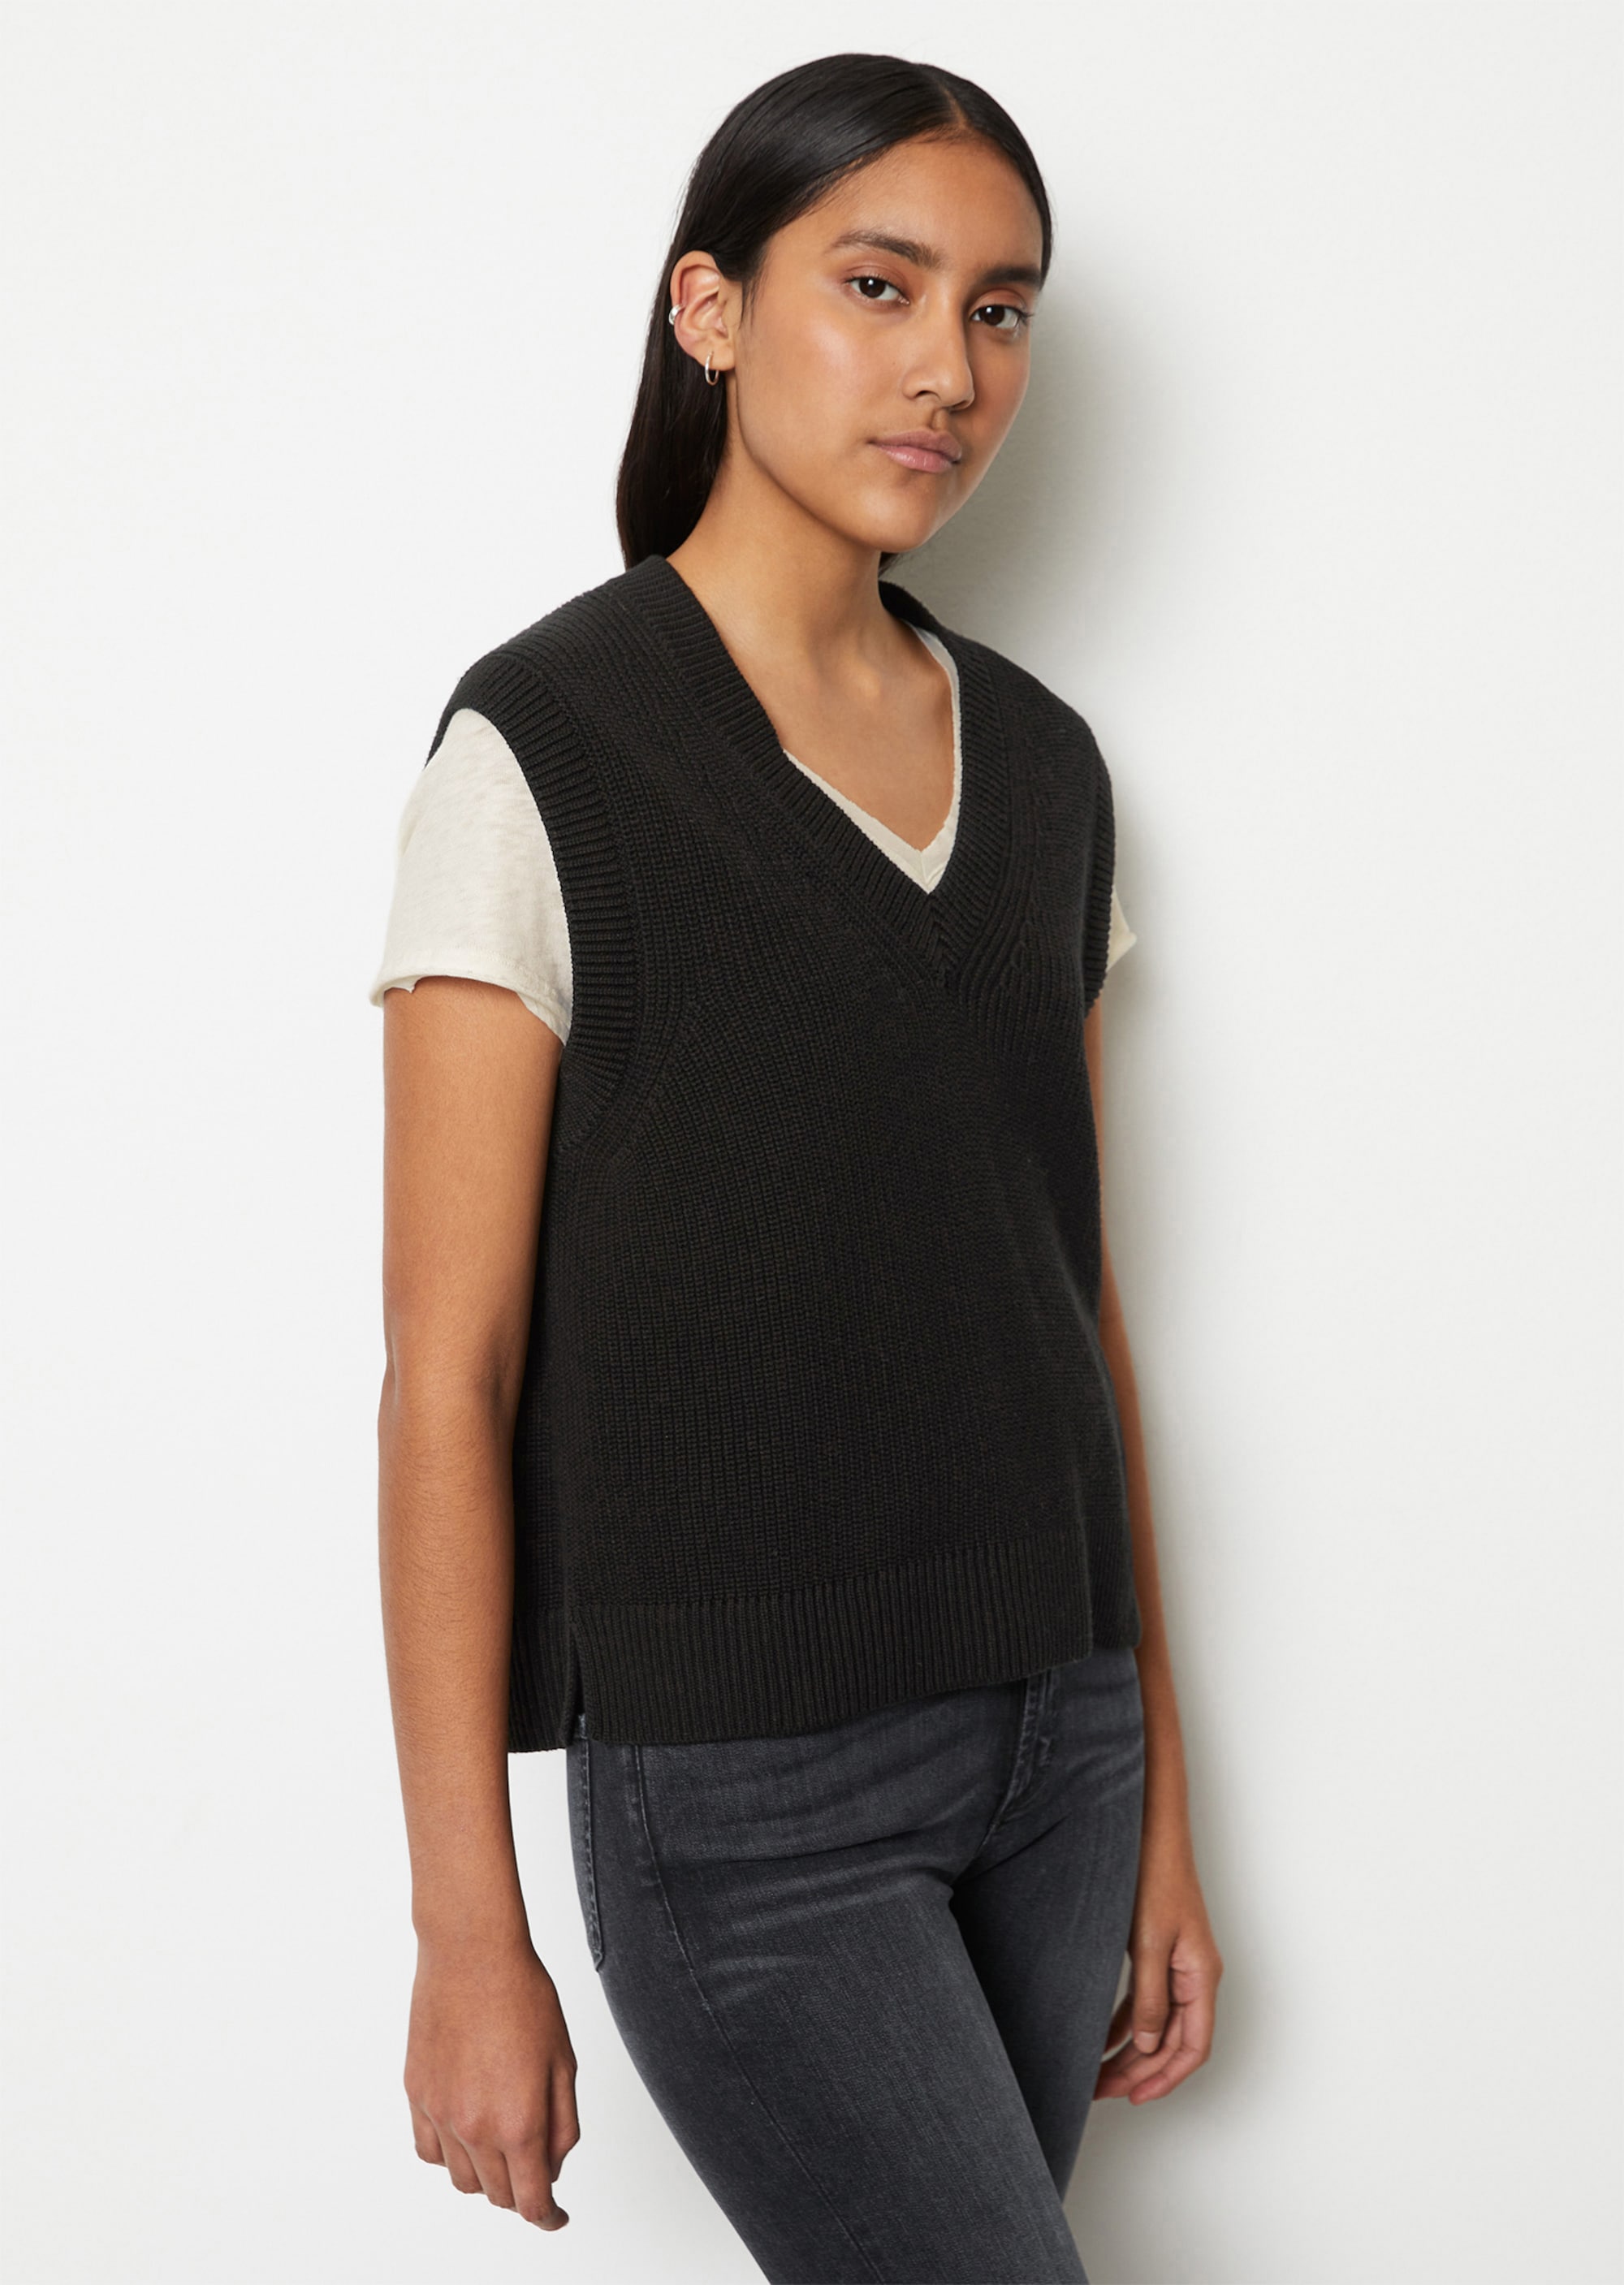 Sleeveless jumper in a regular fit made of pure organic cotton